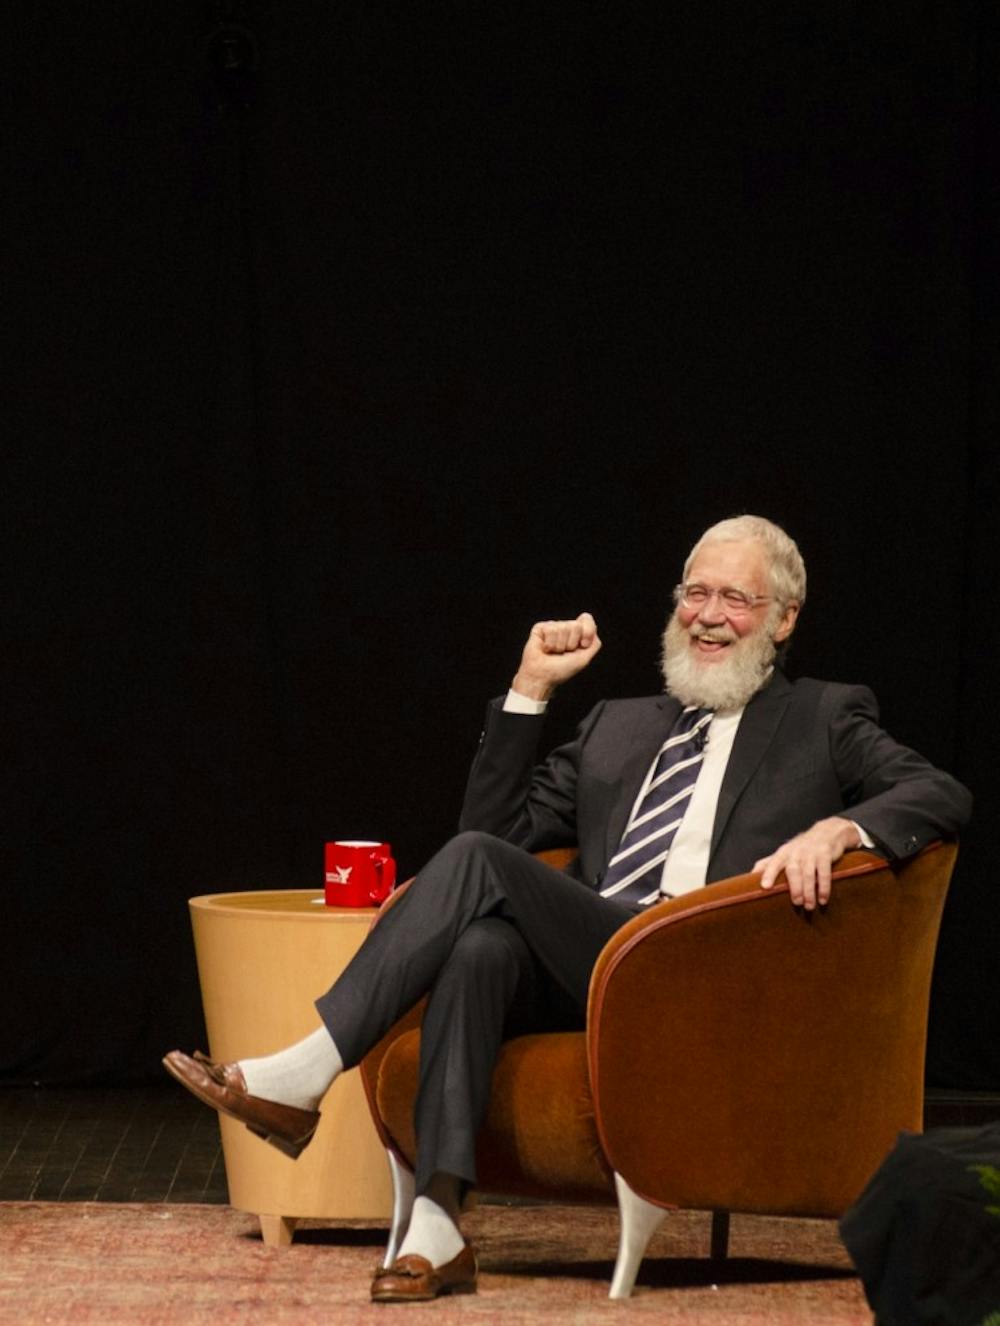 David Letterman donates over 1,000 items to Ball State